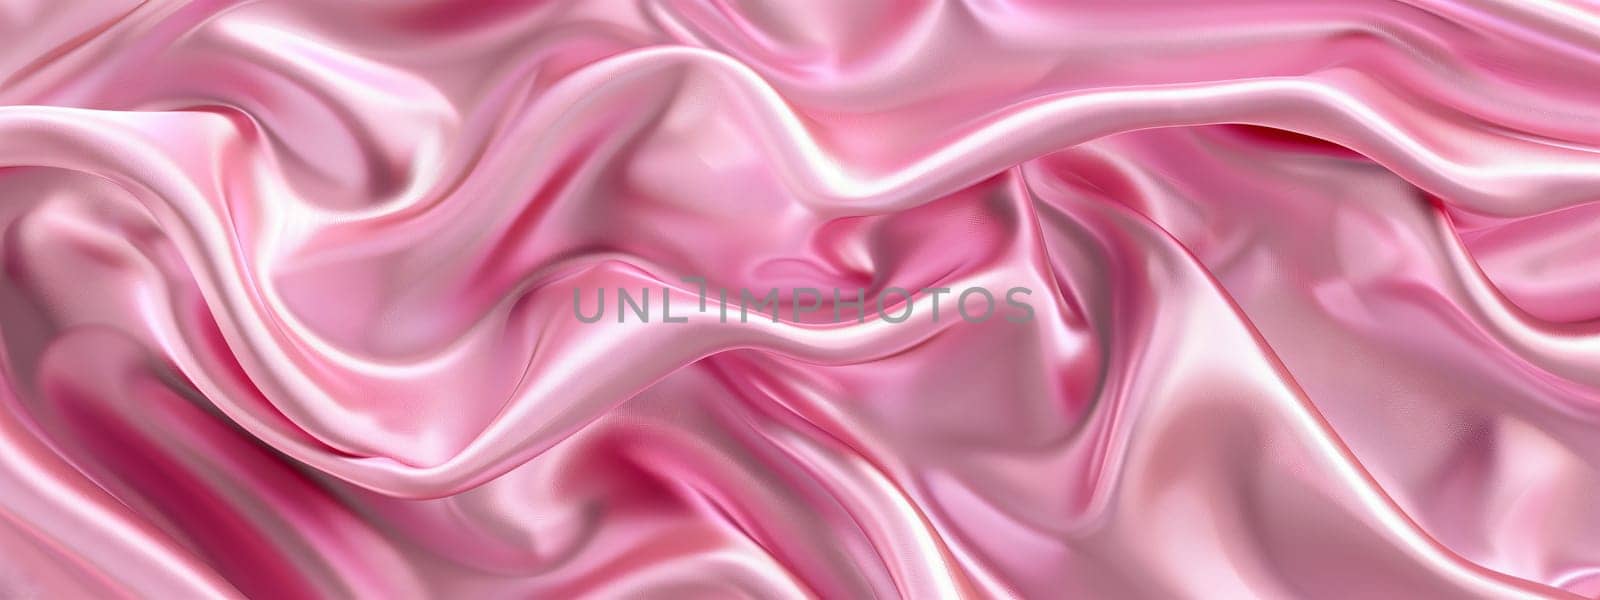 A detailed closeup of a vibrant pink satin fabric featuring waves, creating a mesmerizing pattern reminiscent of liquid petals in shades of violet and magenta